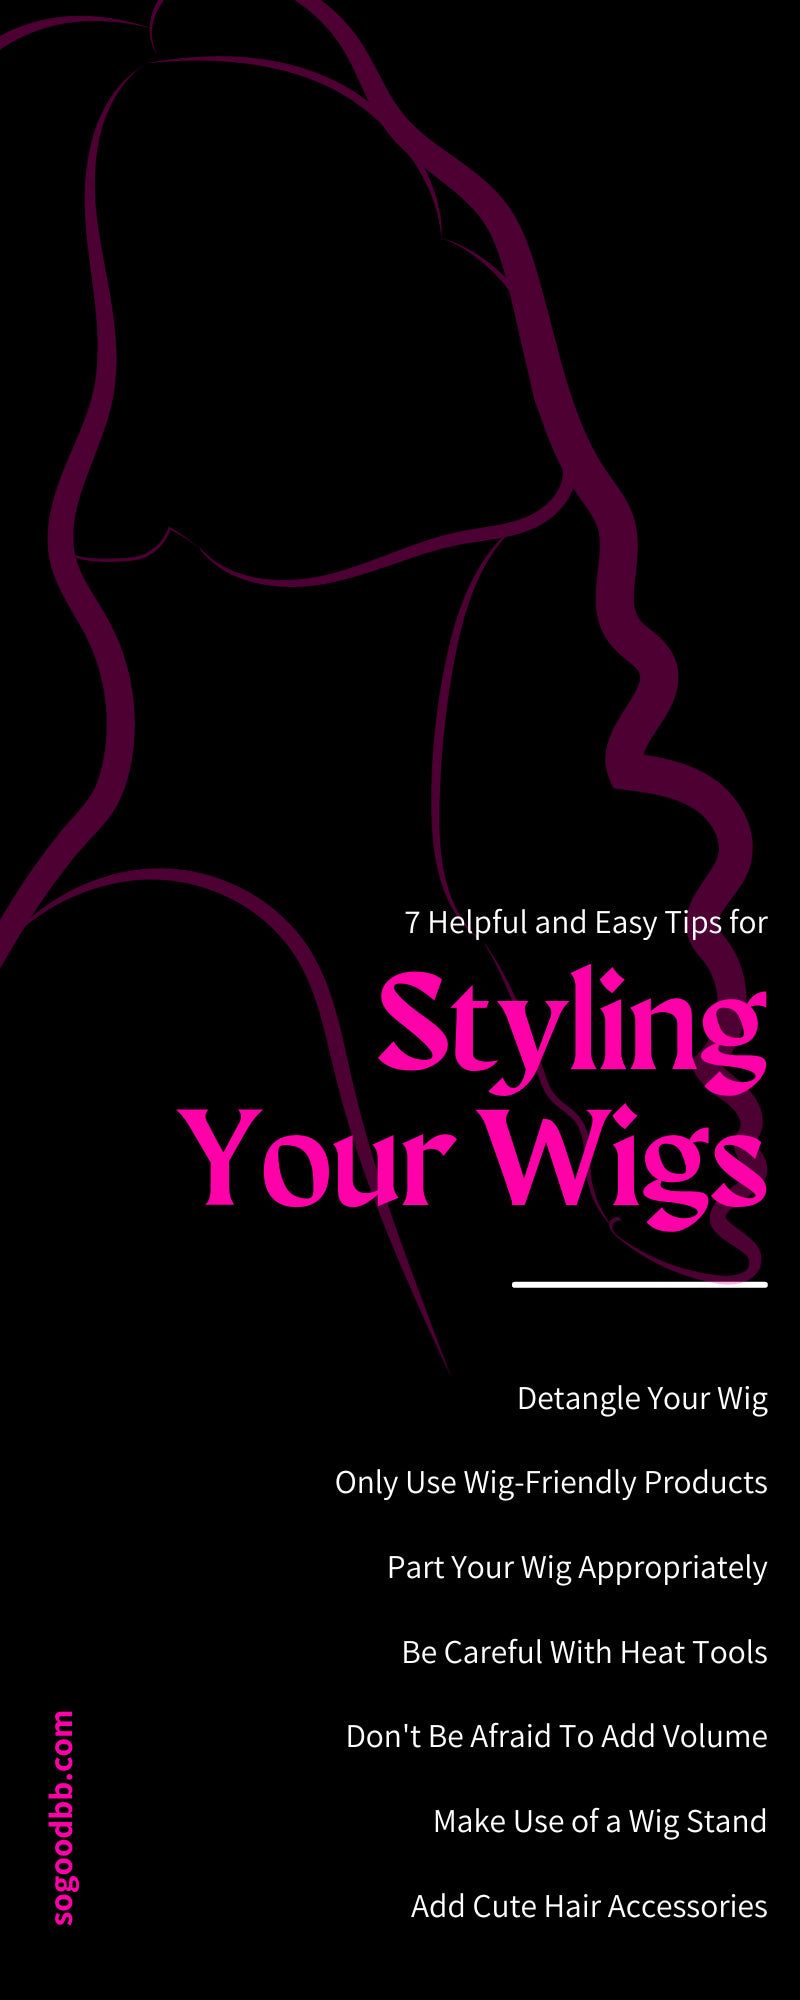 7 Helpful and Easy Tips for Styling Your Wigs